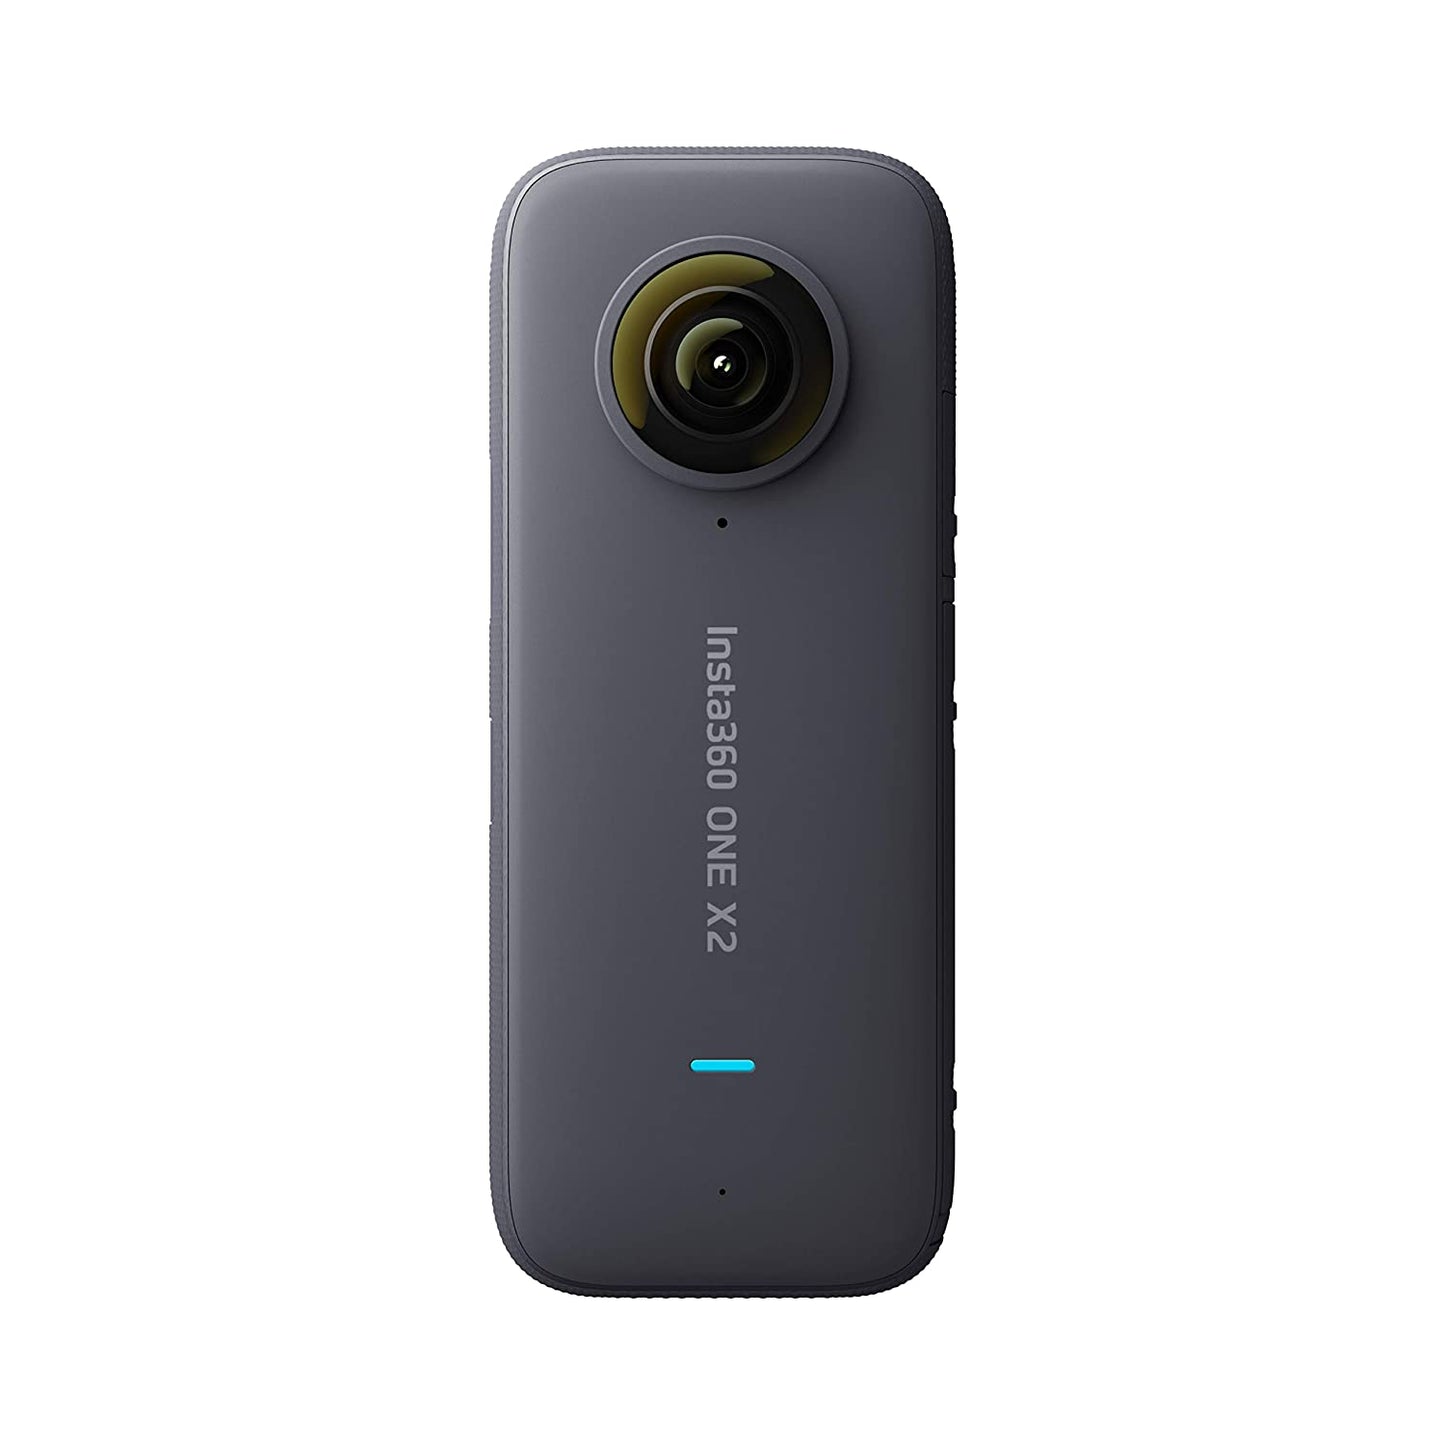 Insta360 ONE X2 Action Camera|5.7k 360 Capture| Steady Cam Mode| FlowState Stabilization| Ultra Bright Screen| Waterproof to 10m|4-Mic 360 Audio |Time Shift | Voice Control |